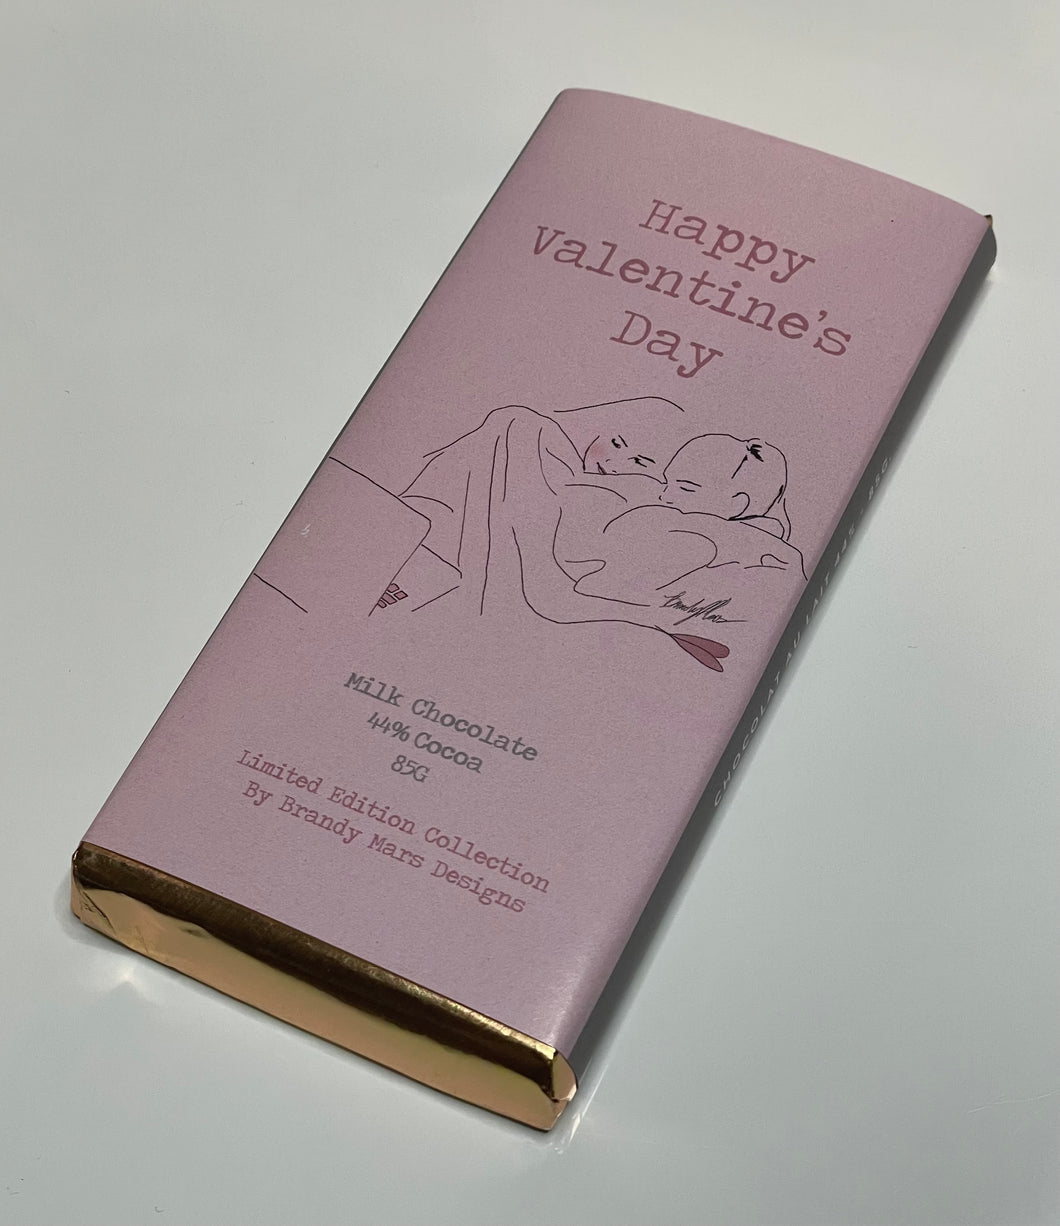 LIMITED EDITION Belgian Chocolate Bar / Only 17 left in this print! Fair-trade ingredients / All natural ingredients / Made in Canada / 85g of chocolate / Special Lesbian Valentine's Day Gift